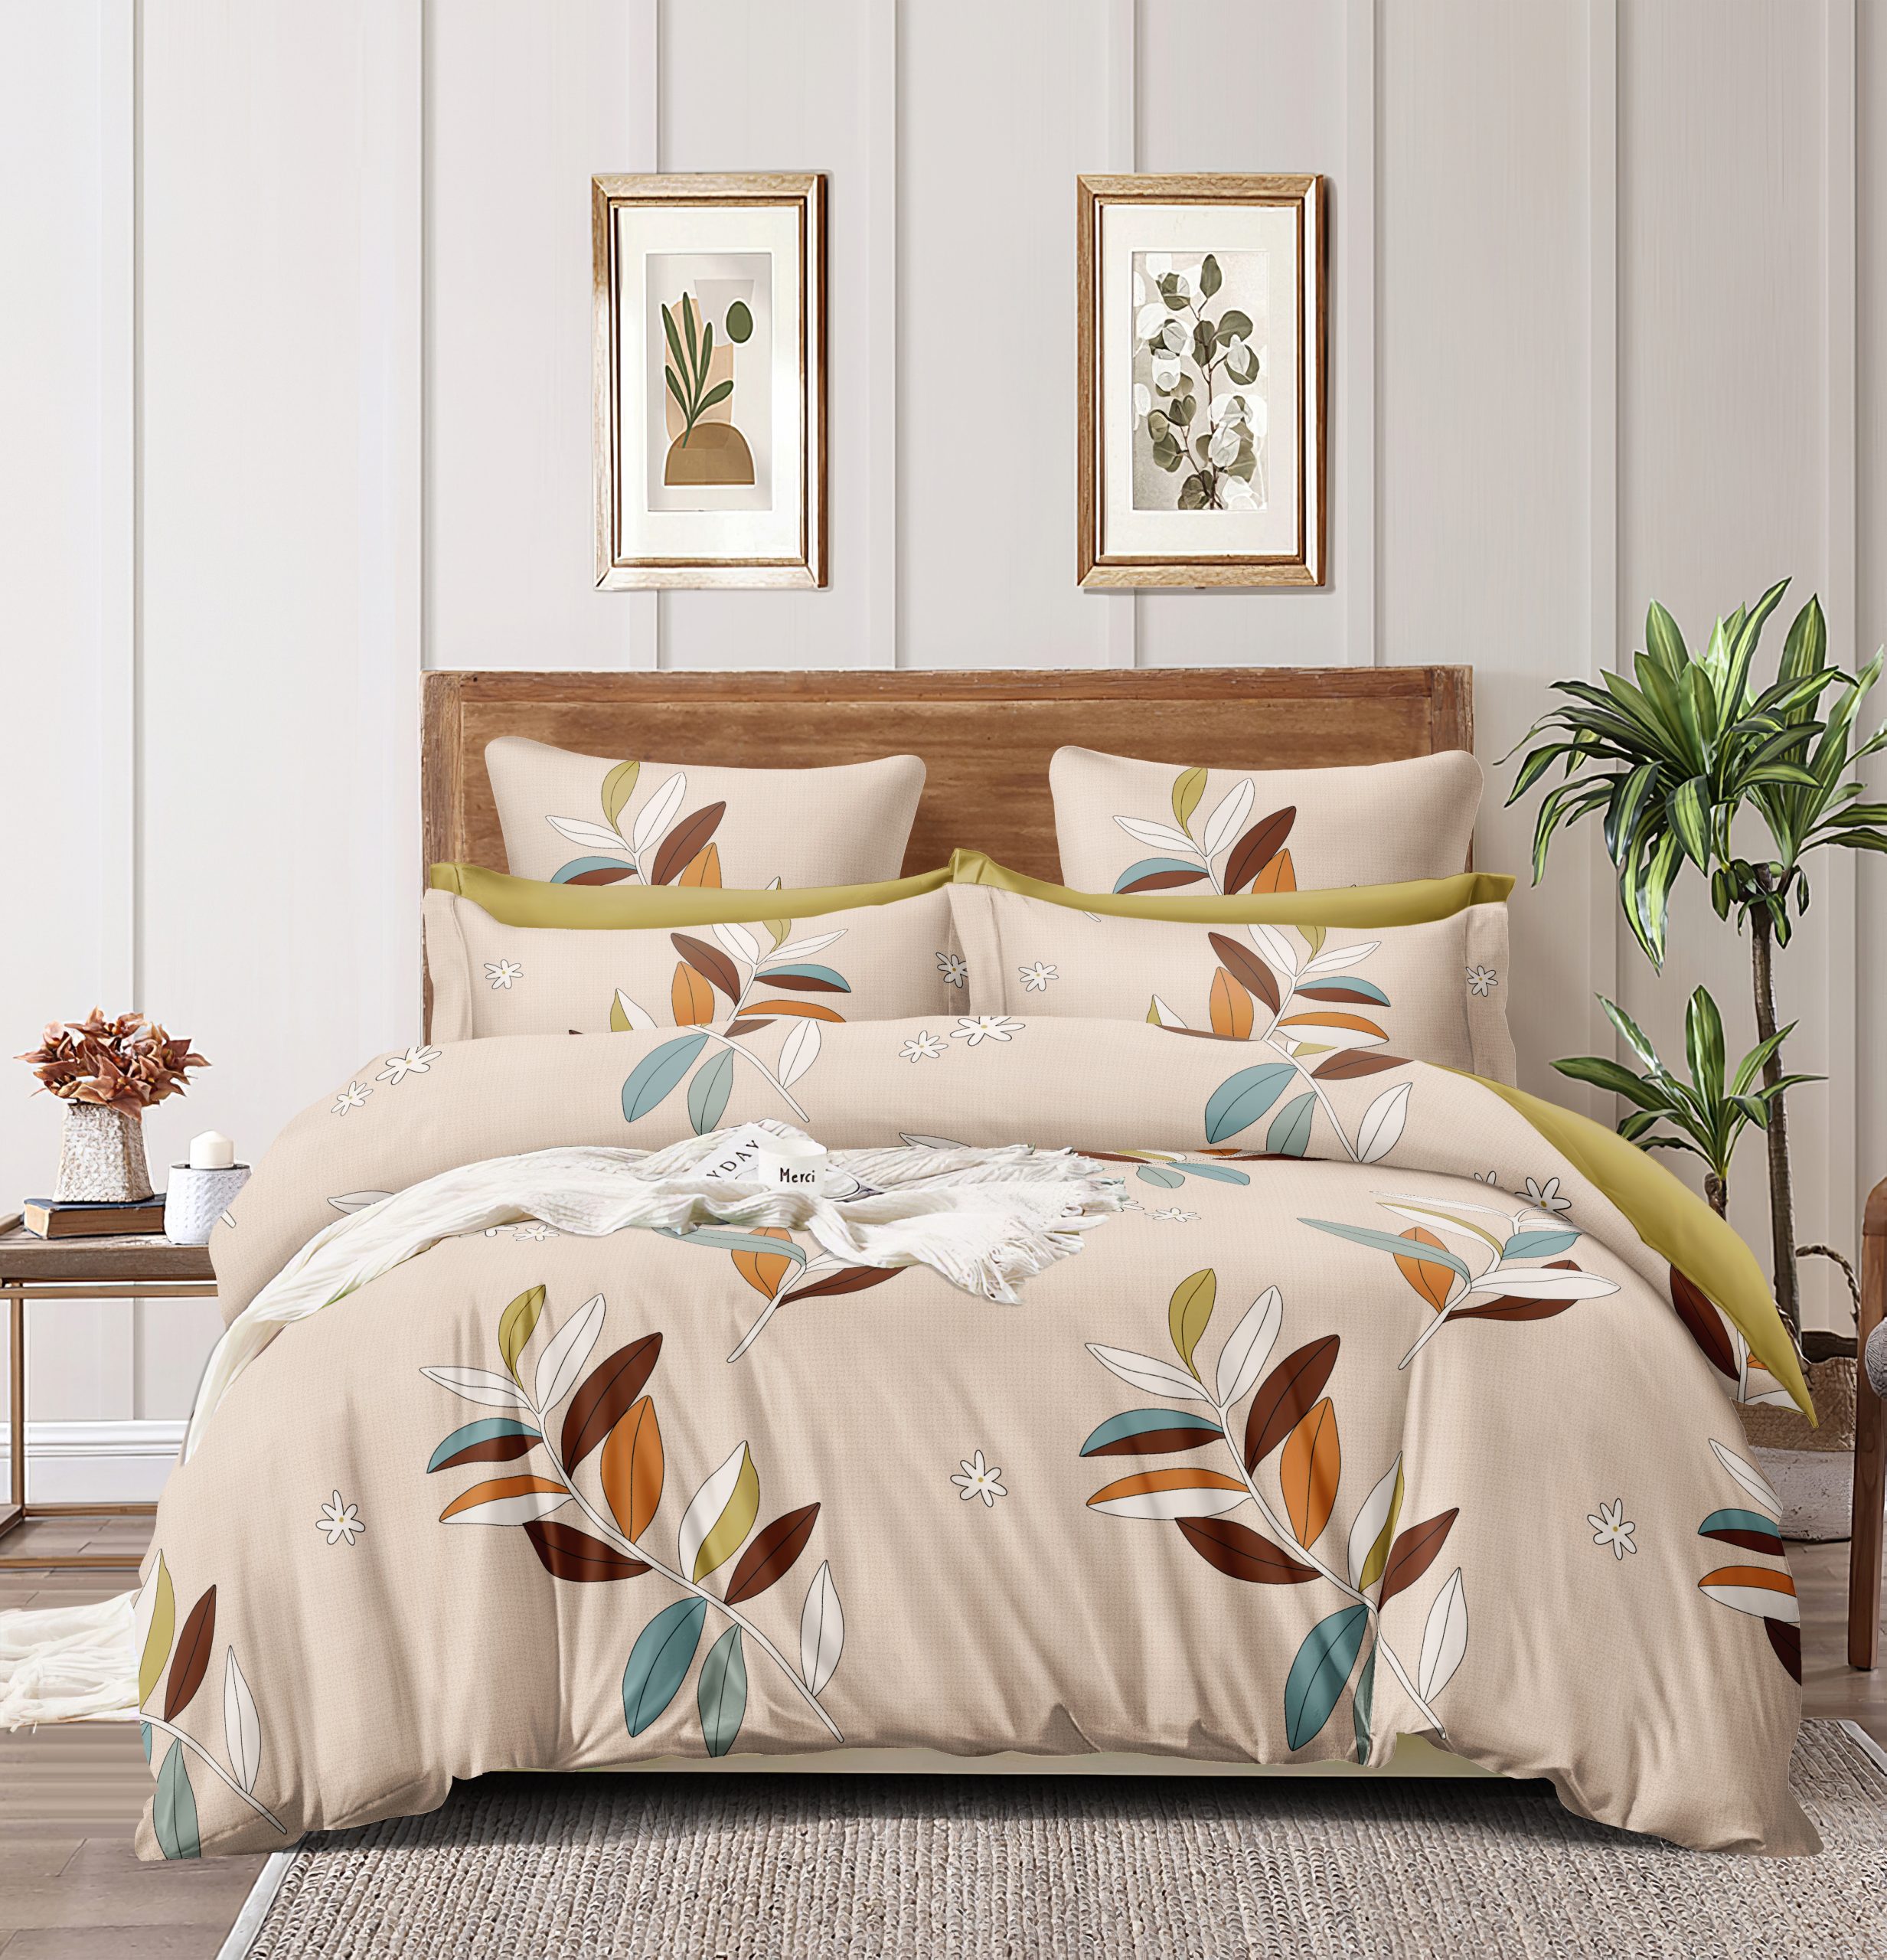 Homewards Brown Leaves Double Bed Comforter – Ultra-Soft, Cozy, and Color Fade Resistant